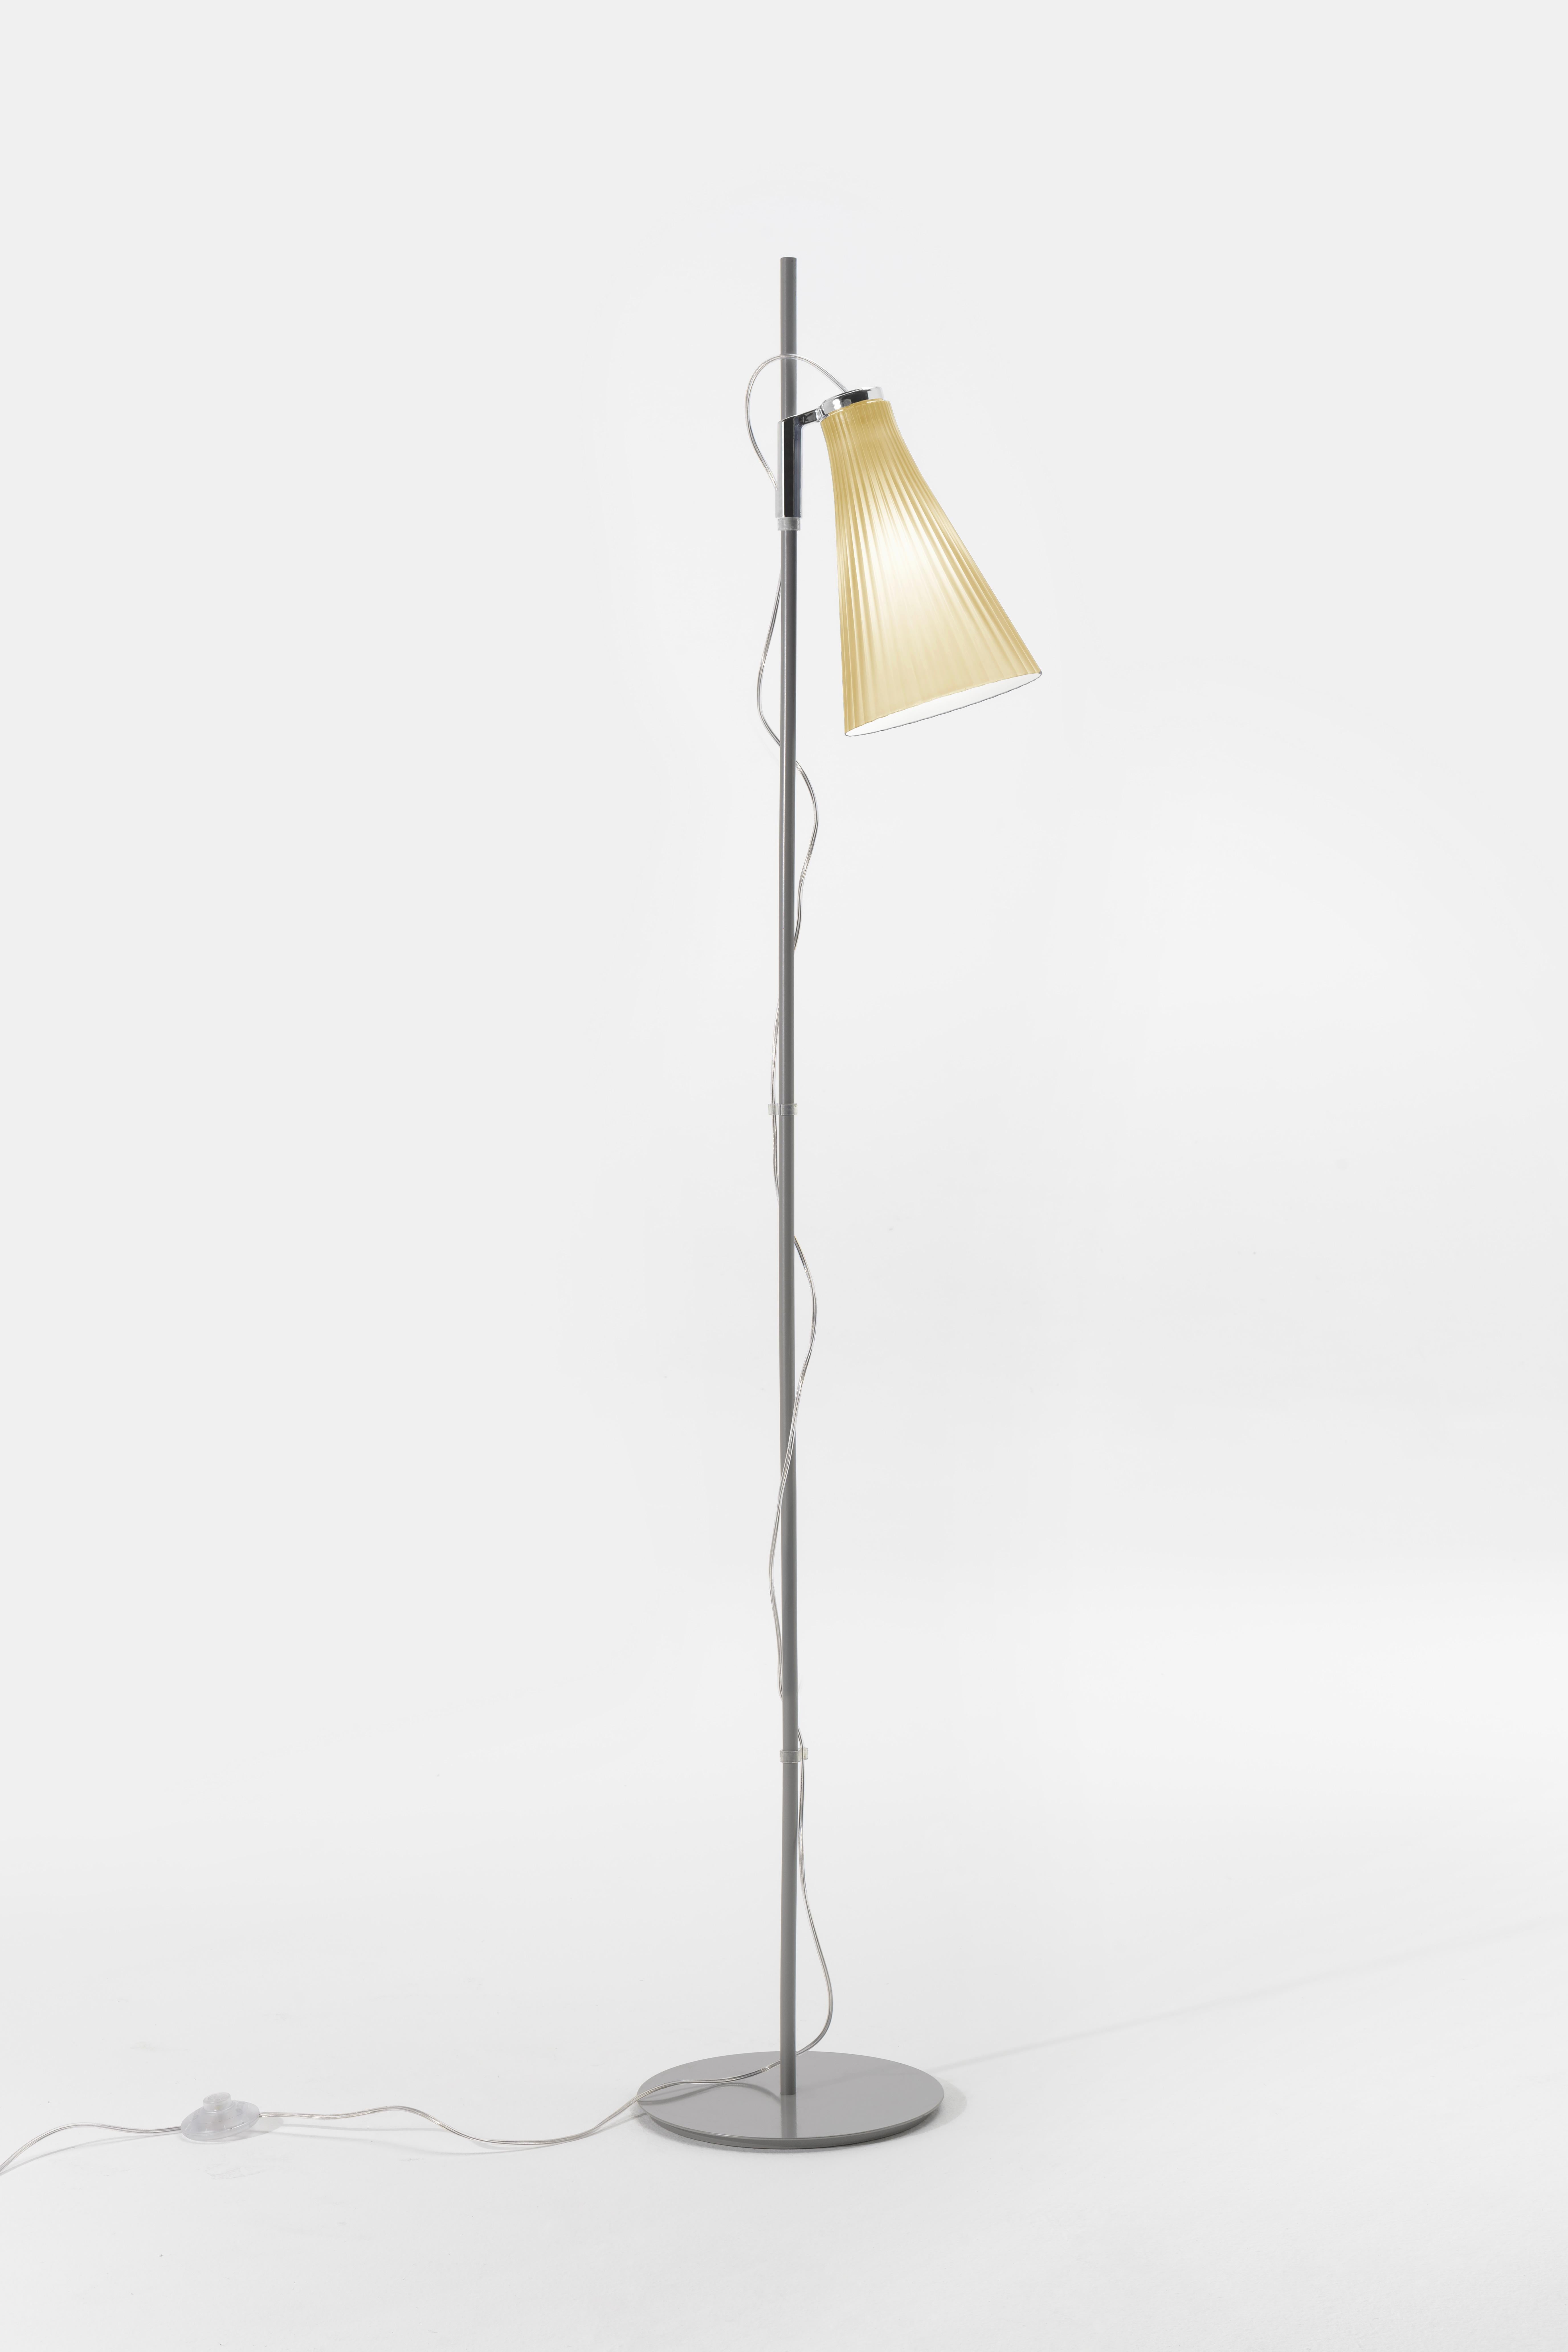 The K-LUX floor lamp stands out for the fascinating way in which it refracts light through specially formed, bi-injected plastic and for a two-coloured shade that is white inside and coloured outside. The lamp comes in six colour variants achieved